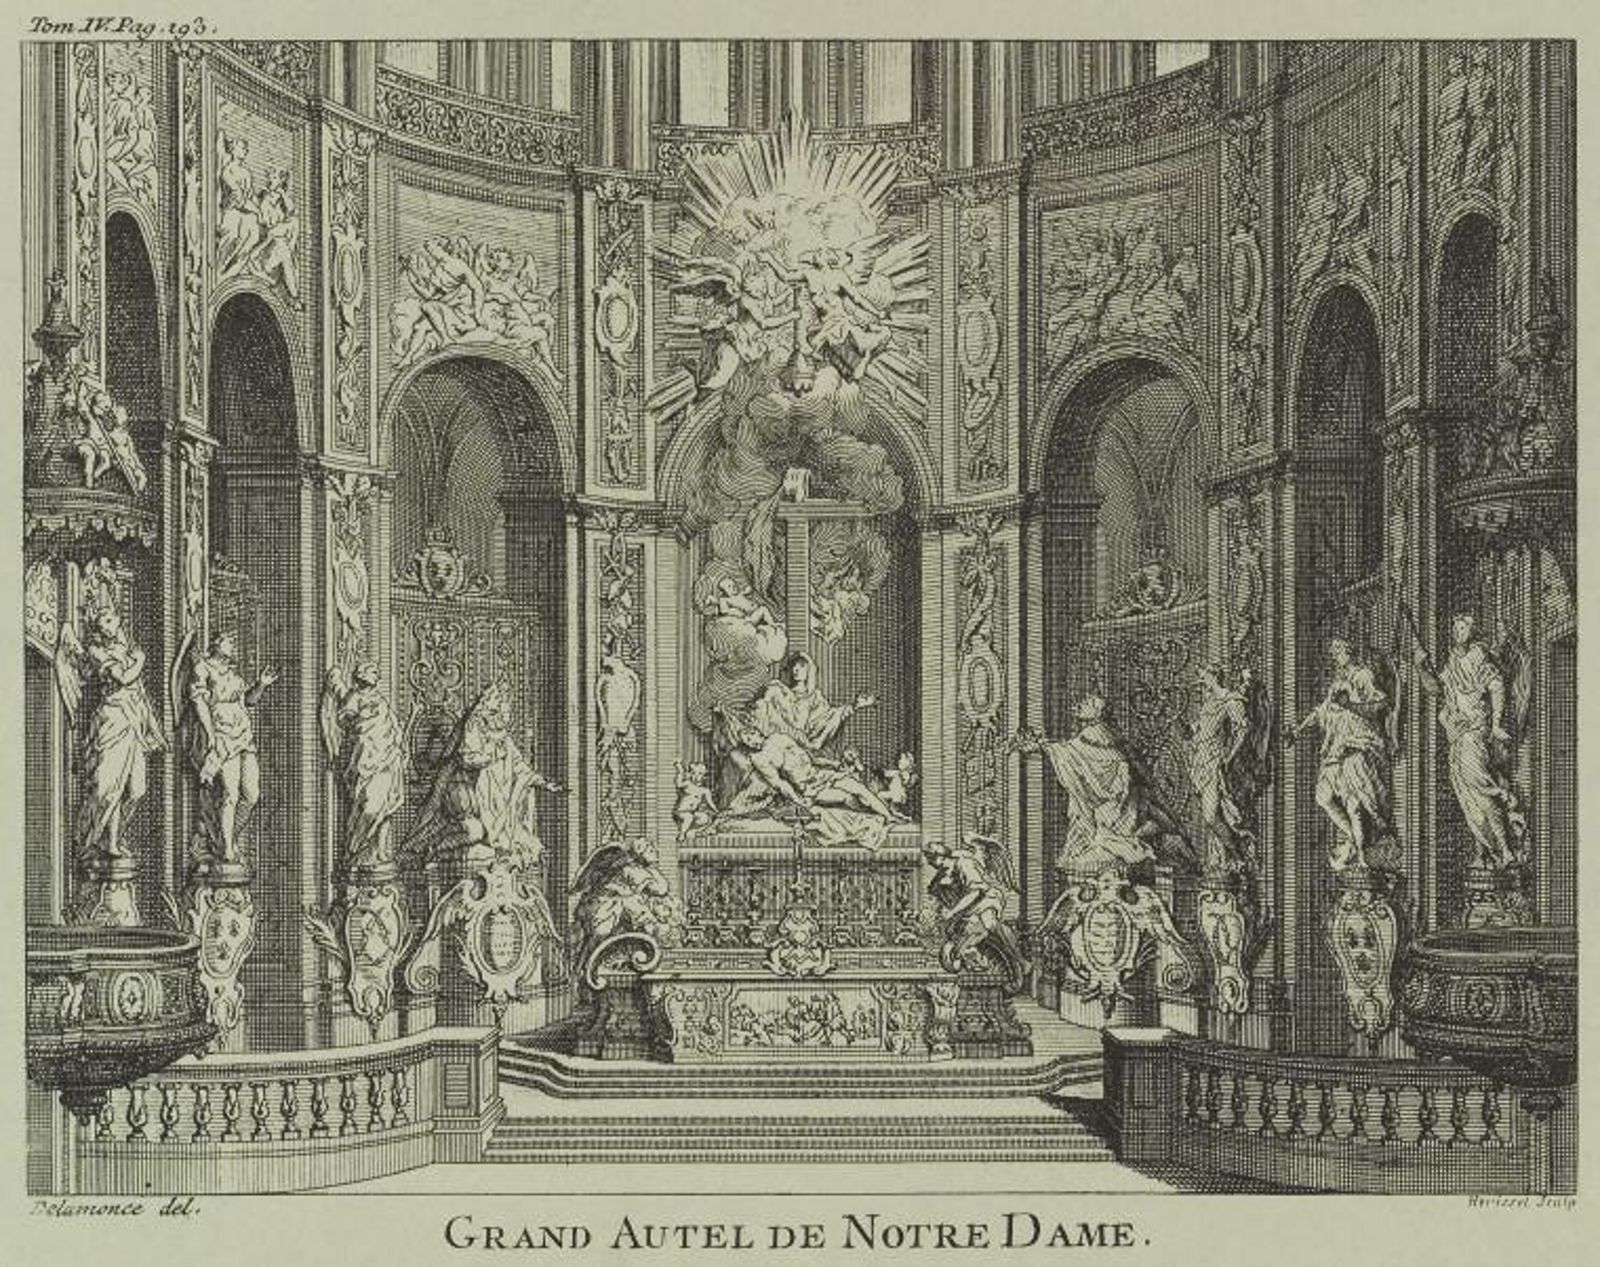 General Research Division, The New York Public Library. Grand Autel de Notre Dame. New York Public Library Digital Collections. Accessed June 30, 2023. https://digitalcollections.nypl.org/items/898d048d-d14d-5dce-e040-e00a18062ceb